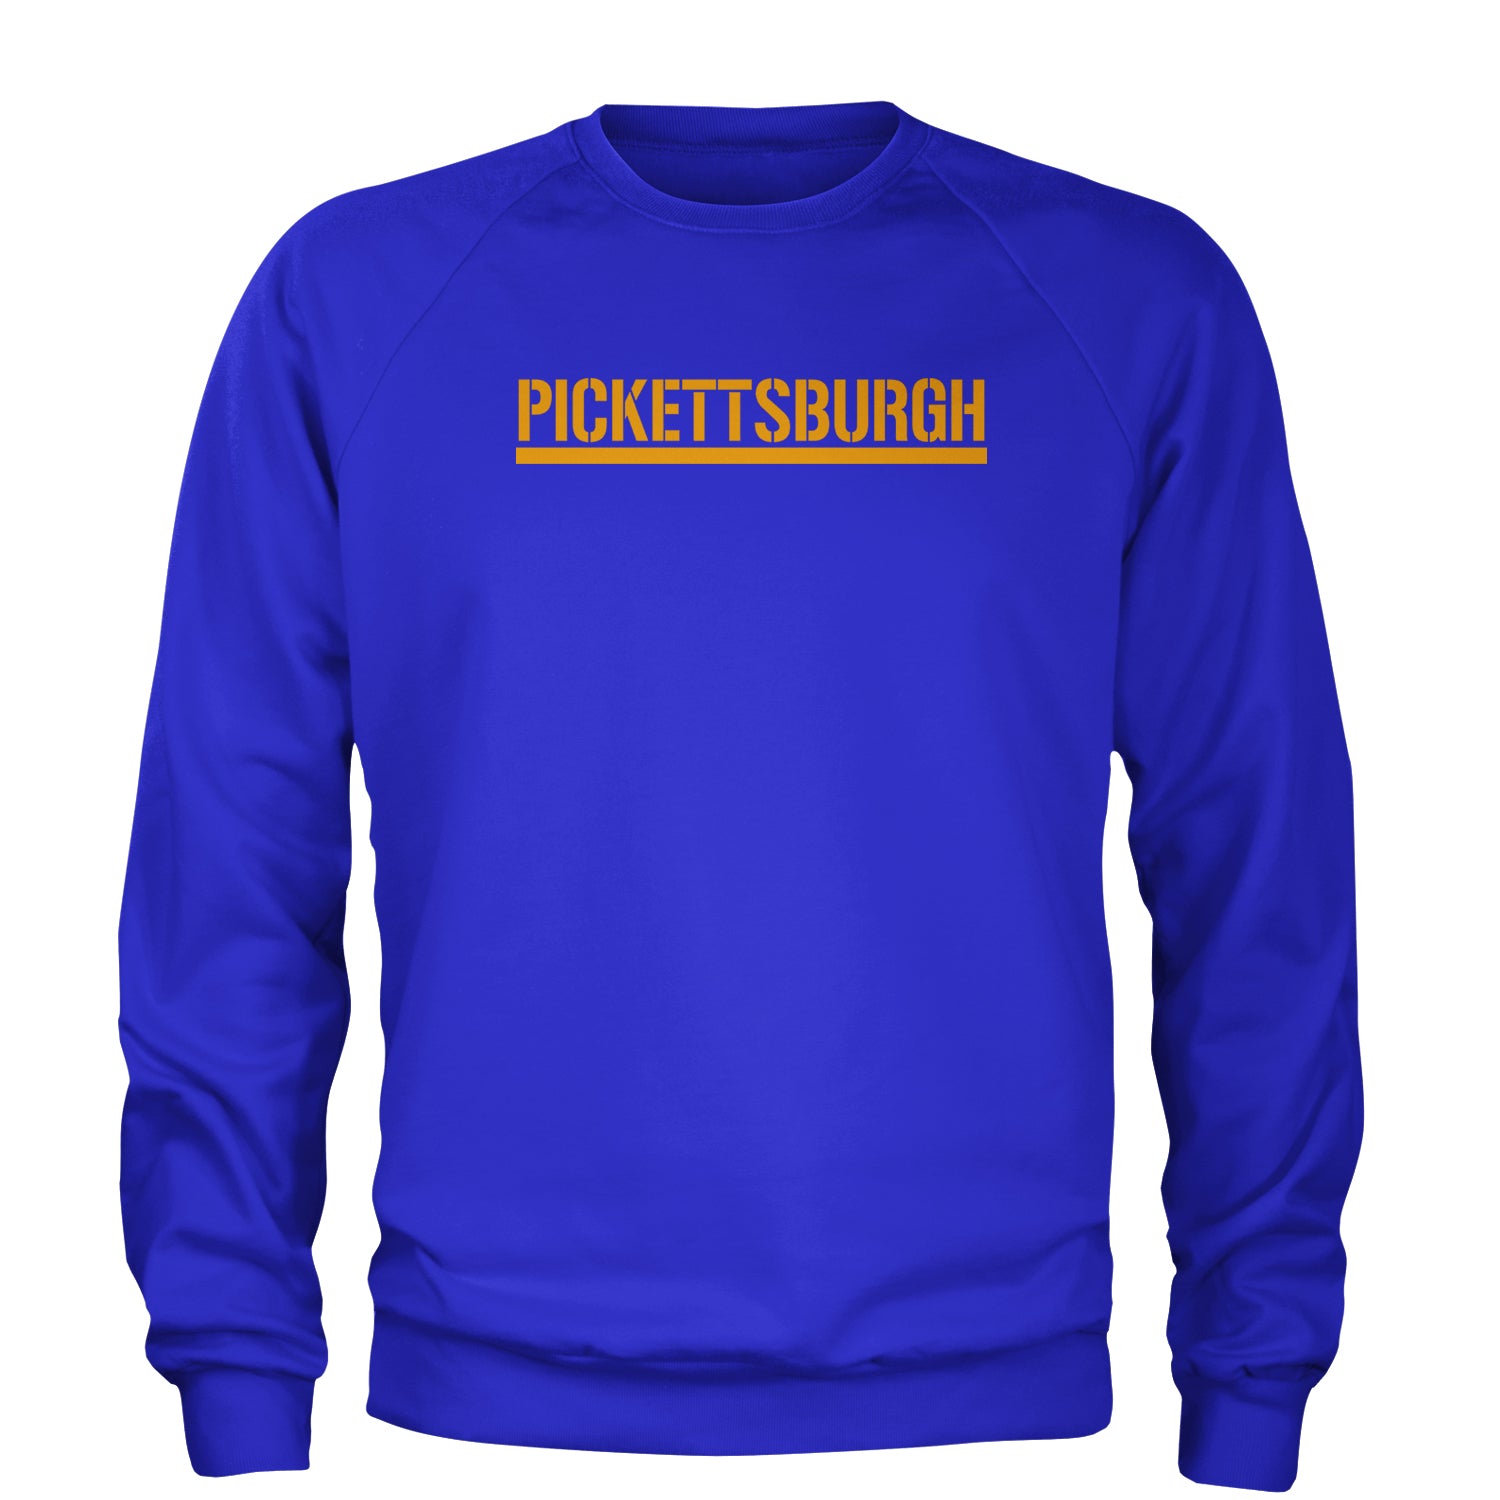 Pickettsburgh Pittsburgh Football Adult Crewneck Sweatshirt apparel, city, clothing, curtain, football, iron, jersey, nation, pennsylvania, steel, steeler by Expression Tees